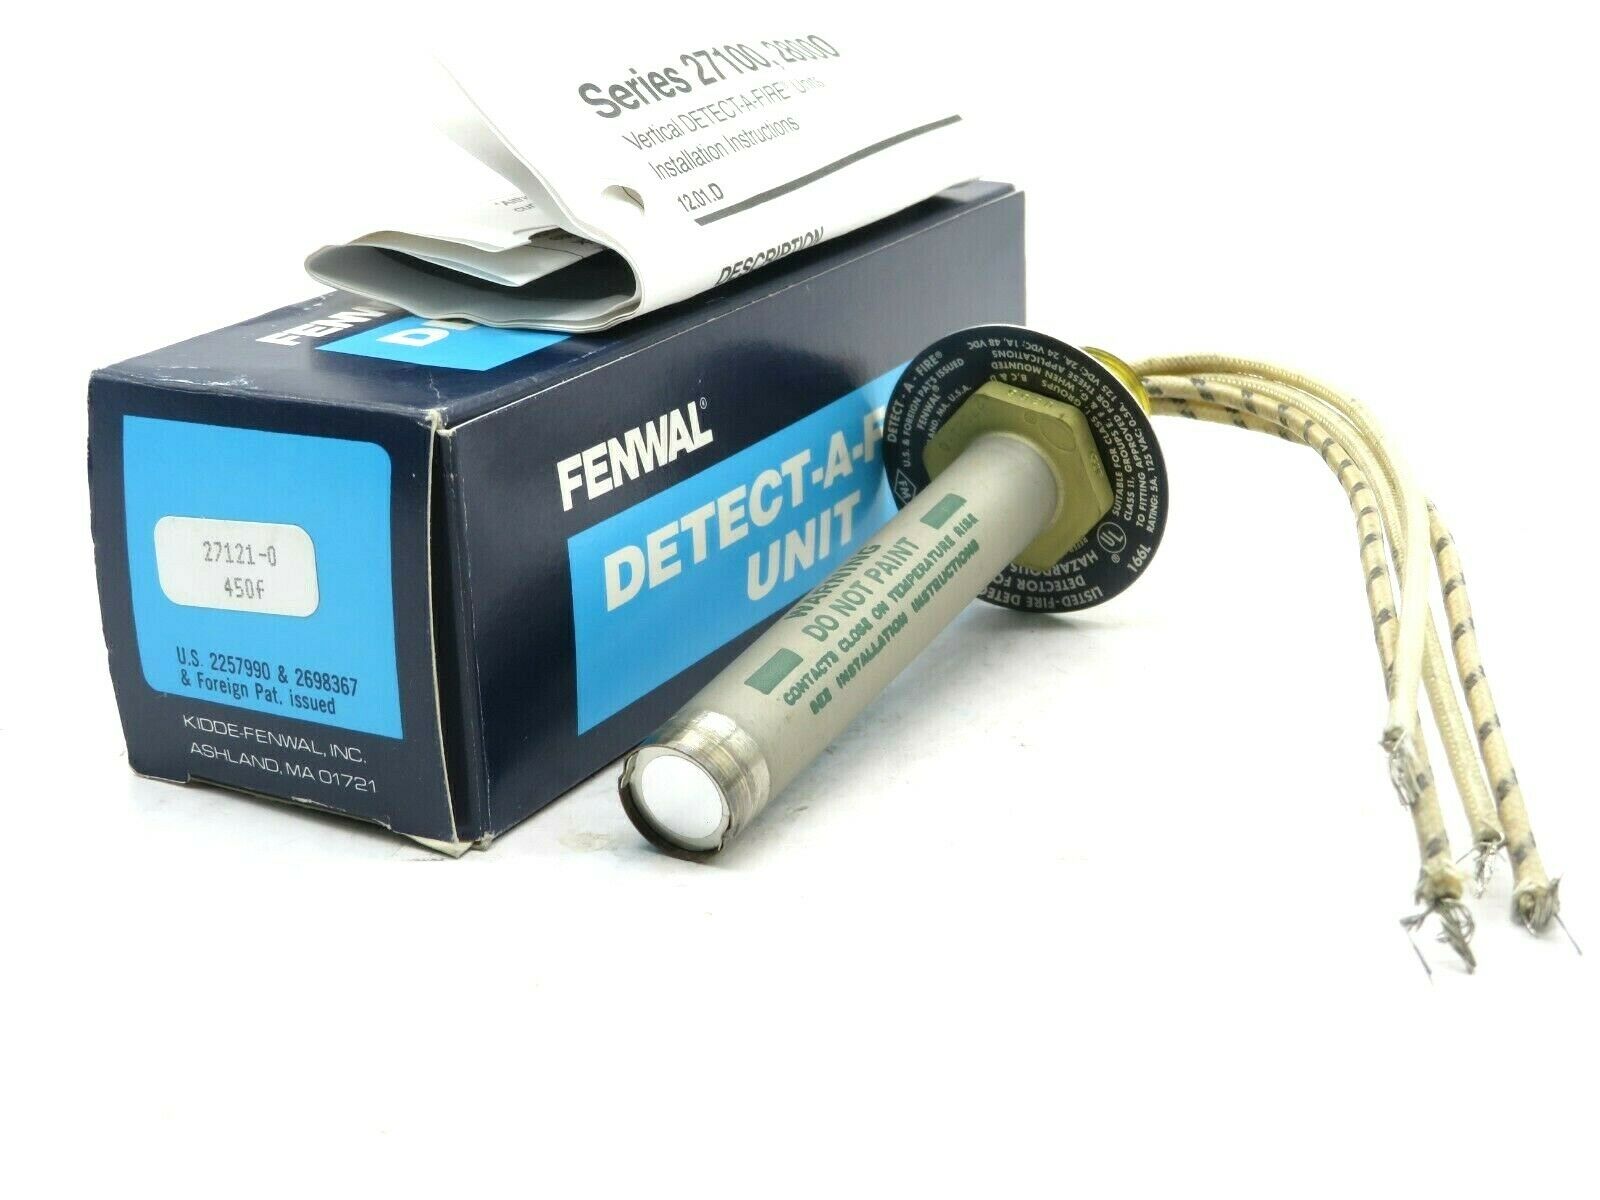 FENWAL 27121-600  THERMOSTICK DETECT A FIRE DETECTOR  NEW IN BOX  ATEX 